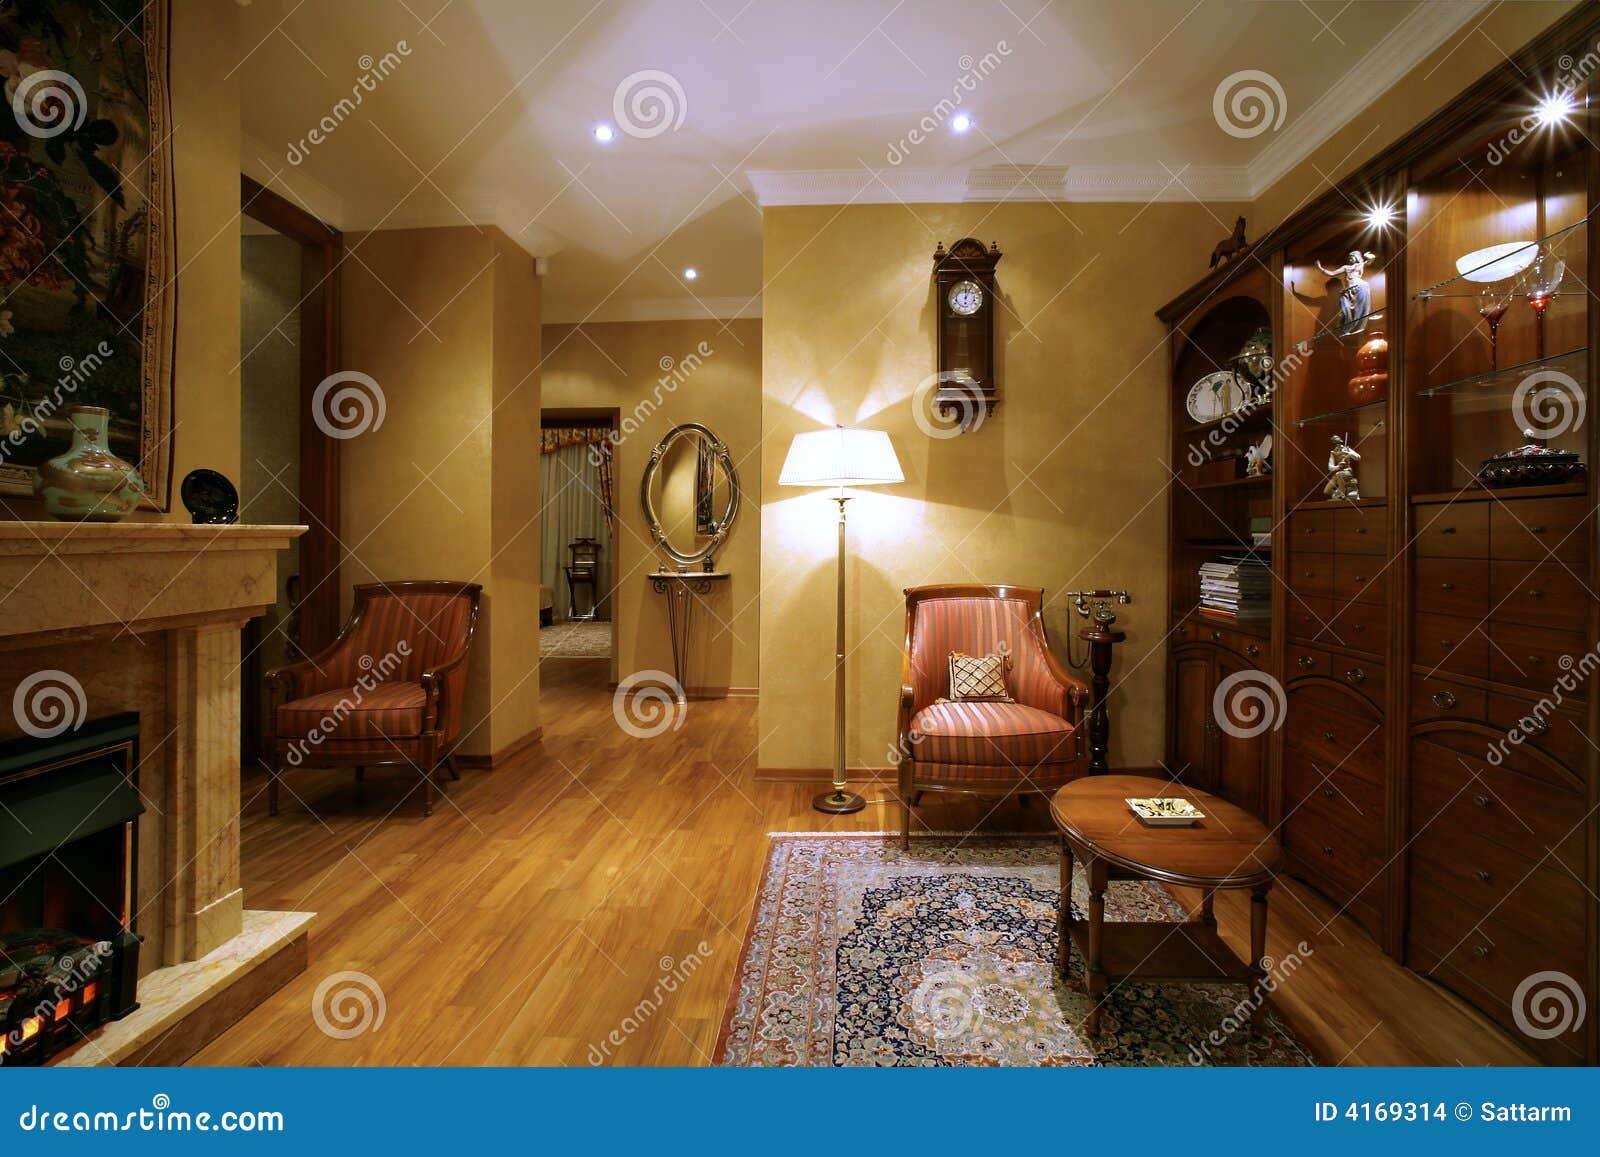 dwelling room rich person in classical style